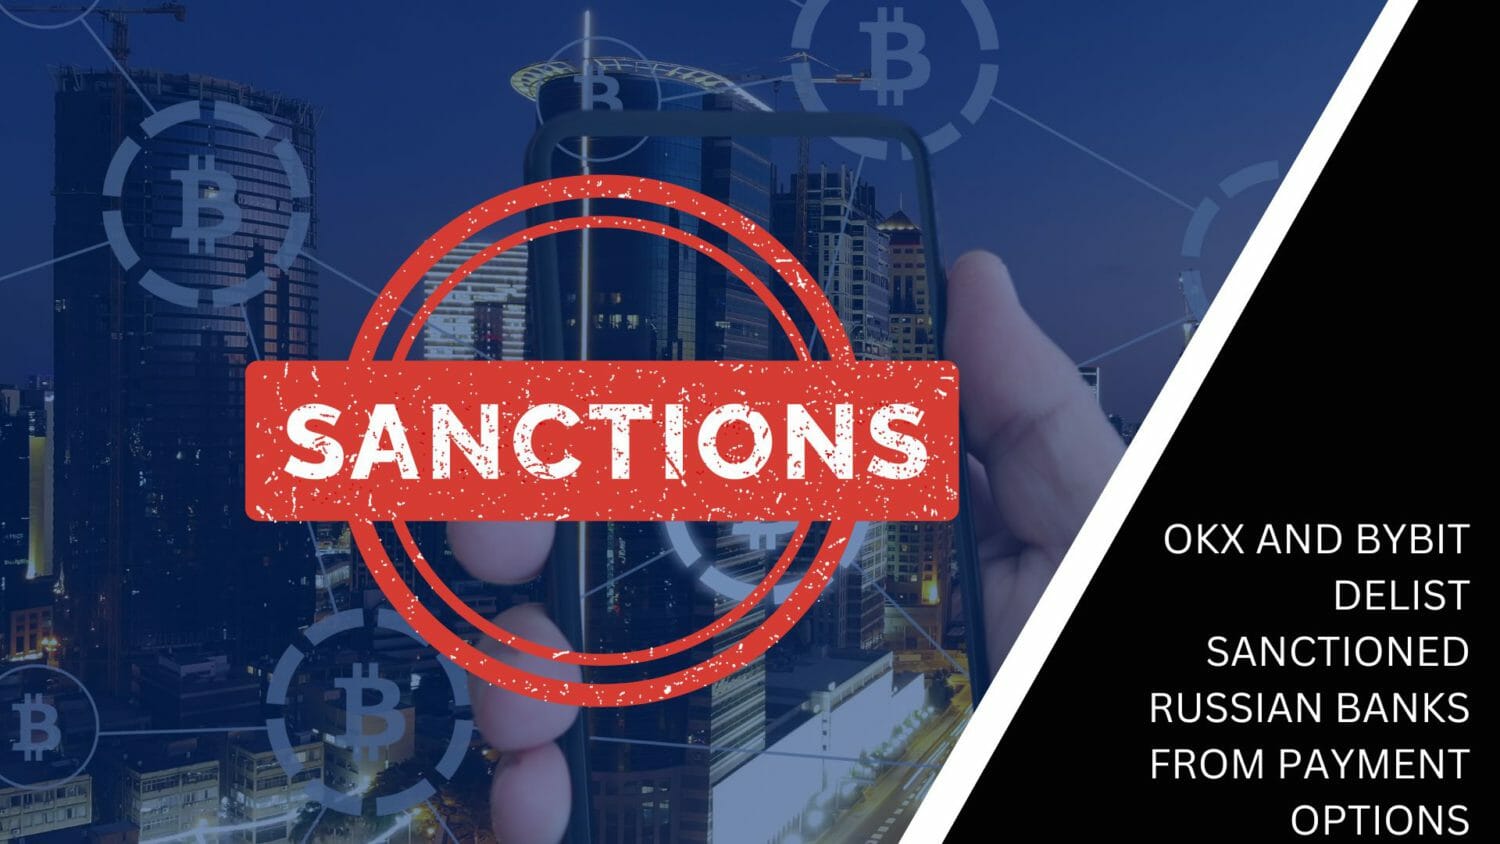 Okx And Bybit Delist Sanctioned Russian Banks From Payment Options